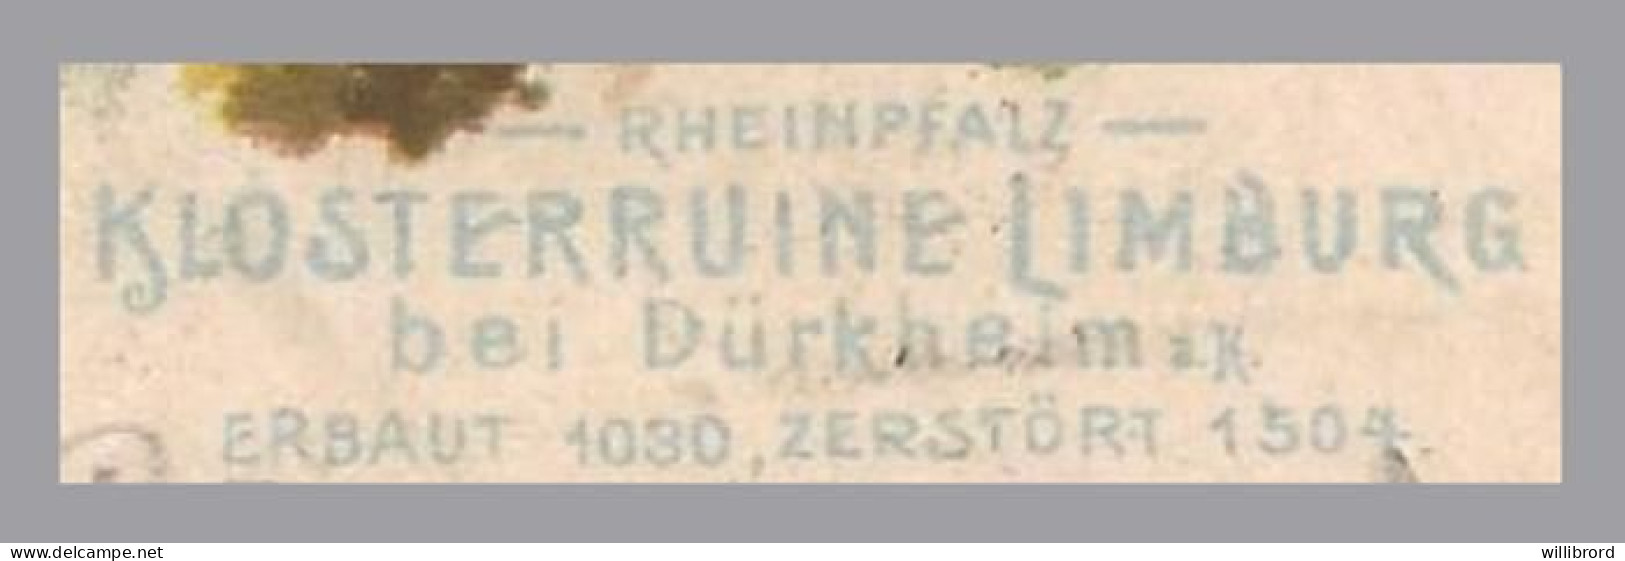 LUXEMBOURG -1900 TWICE REDIRECTED MAIL - Bavaria - Germany - Esch Alzette, Luxembourg - Taxed Cross-border - Portomarken